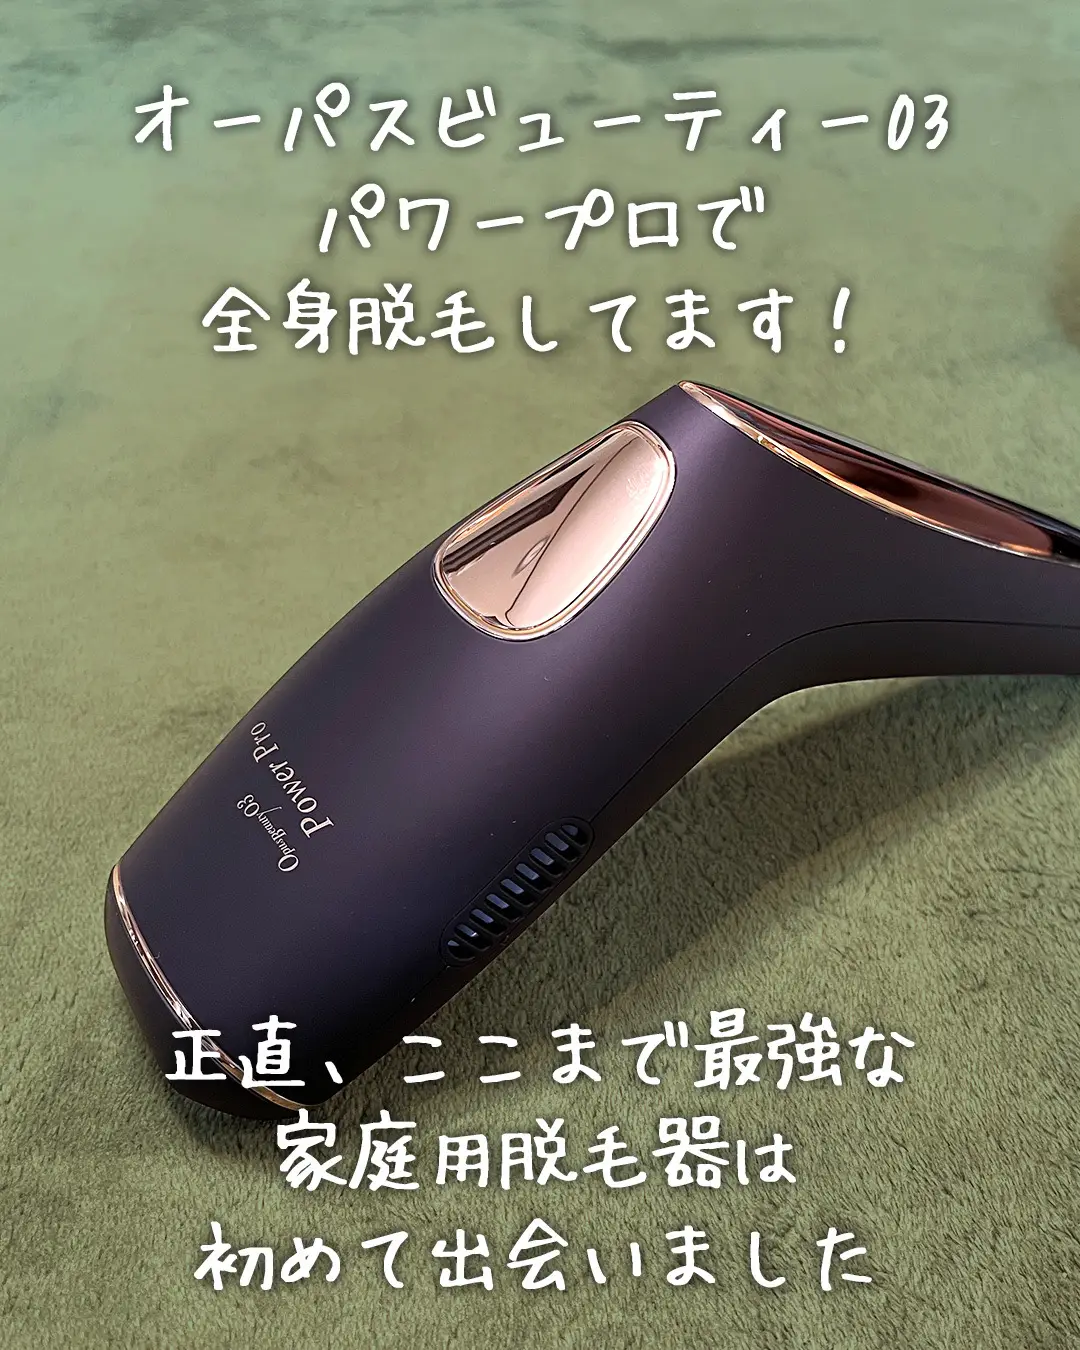 Why I bought Opus Beauty 03 Power Pro even though I have another